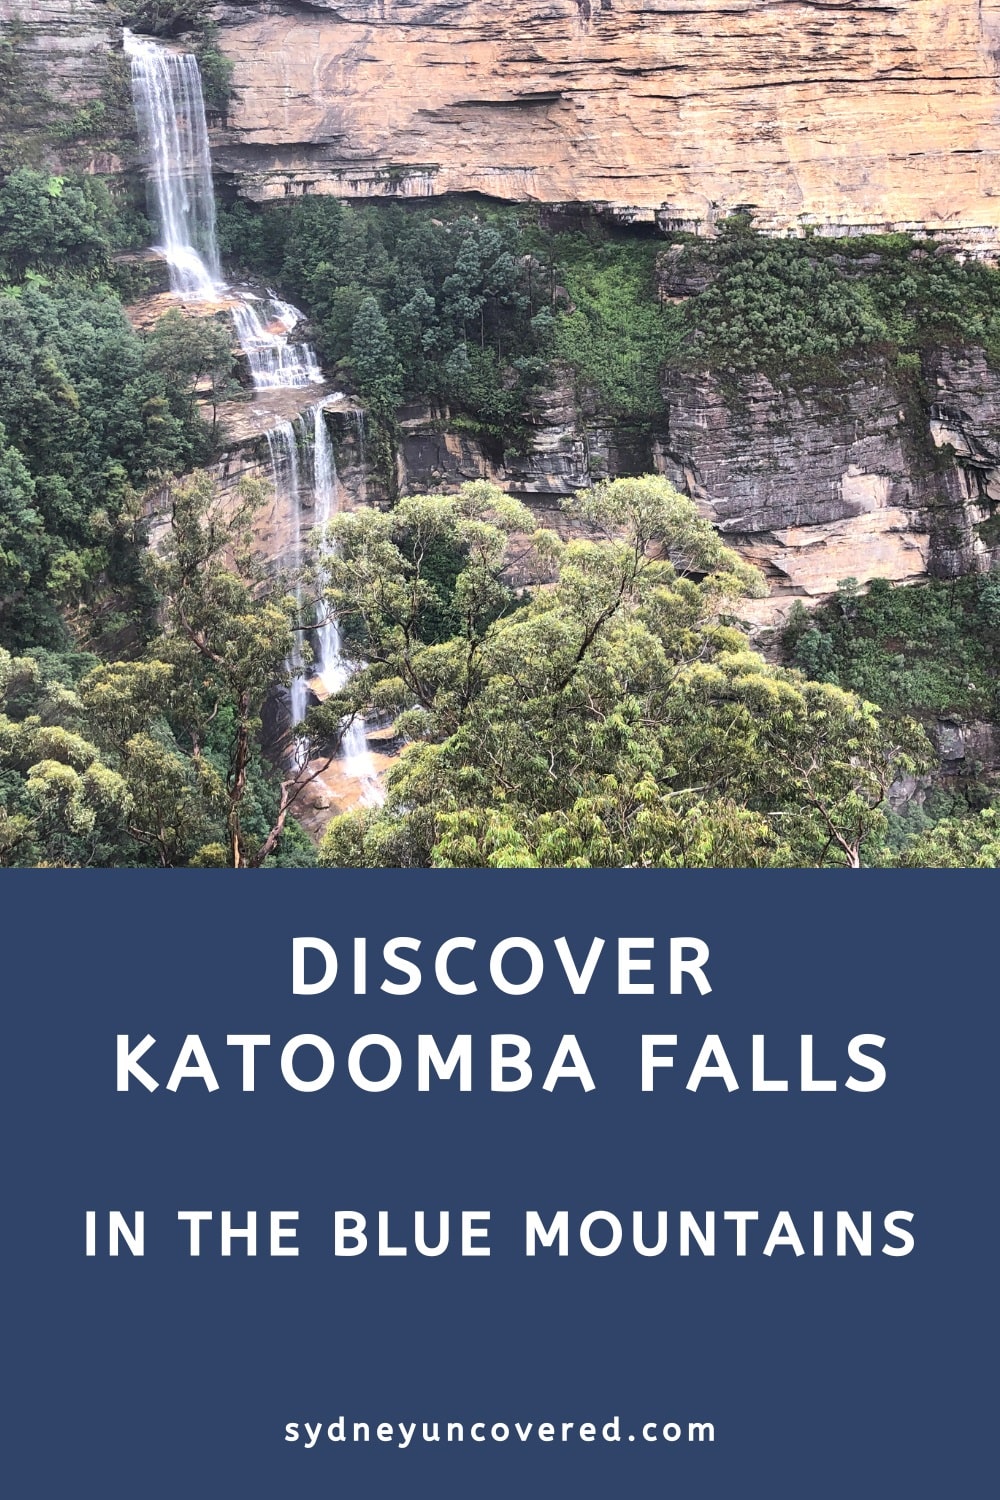 Katoomba Falls in the Blue Mountains